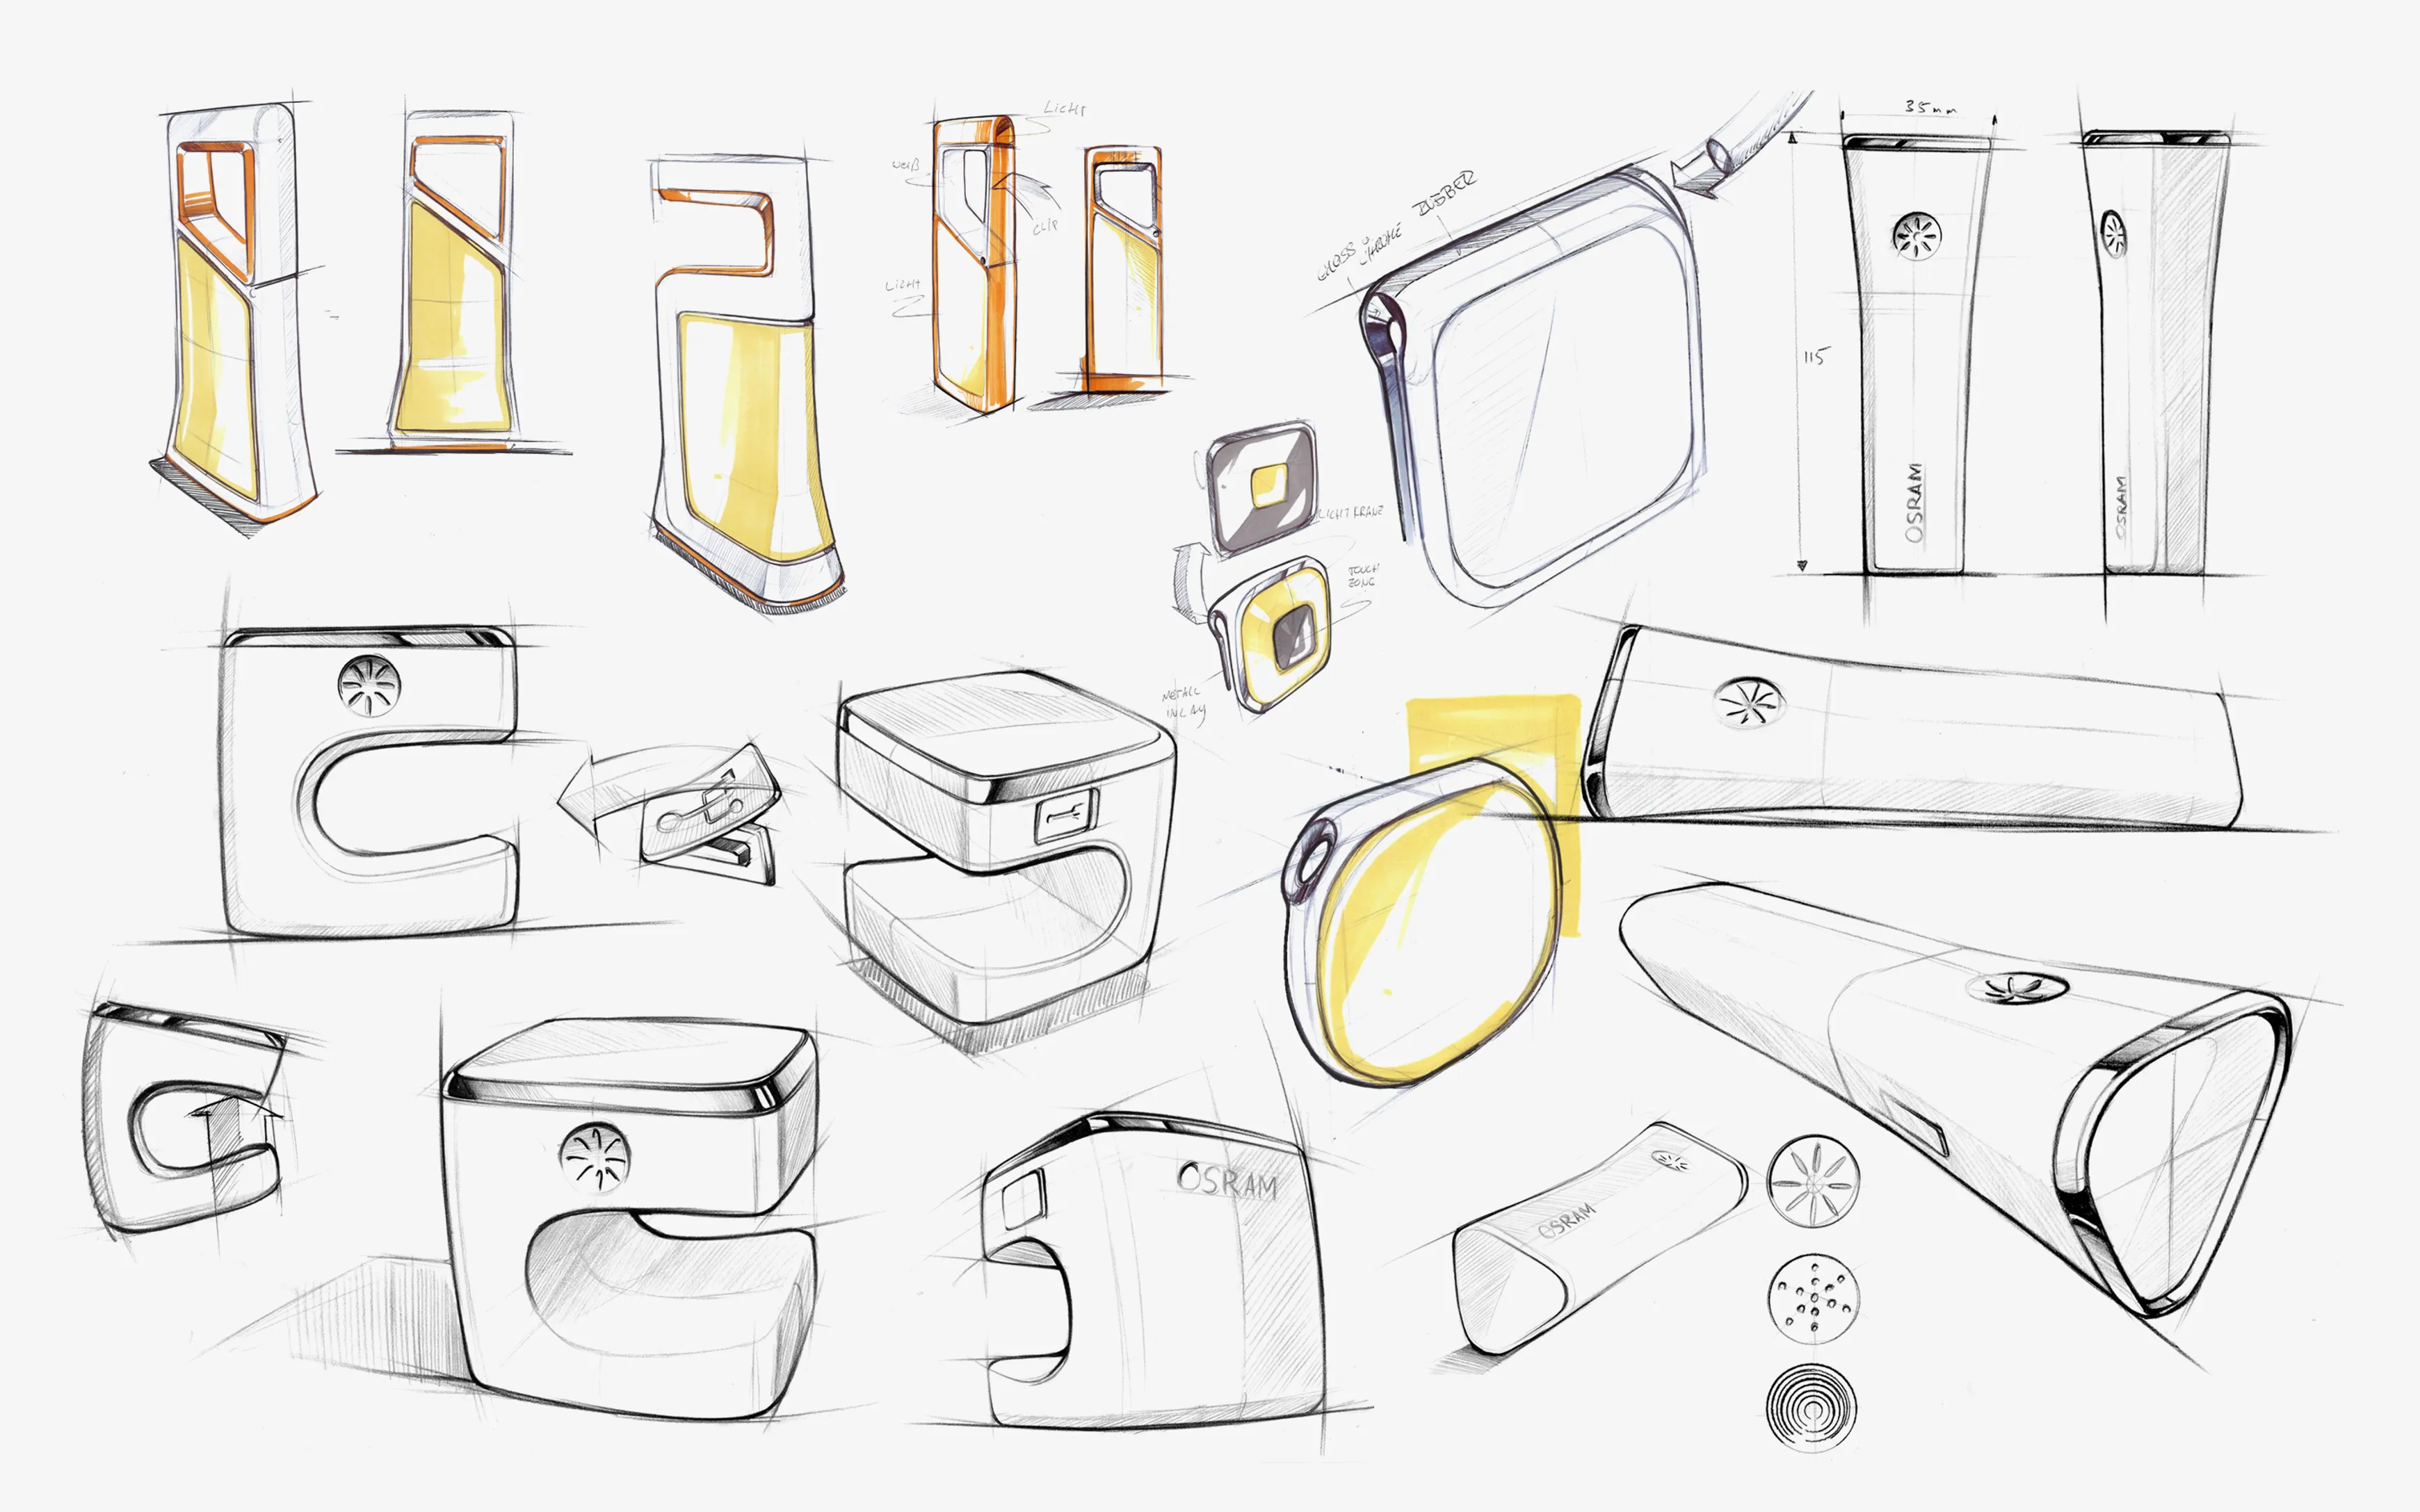 Sketches of multiple Osram LED lamps